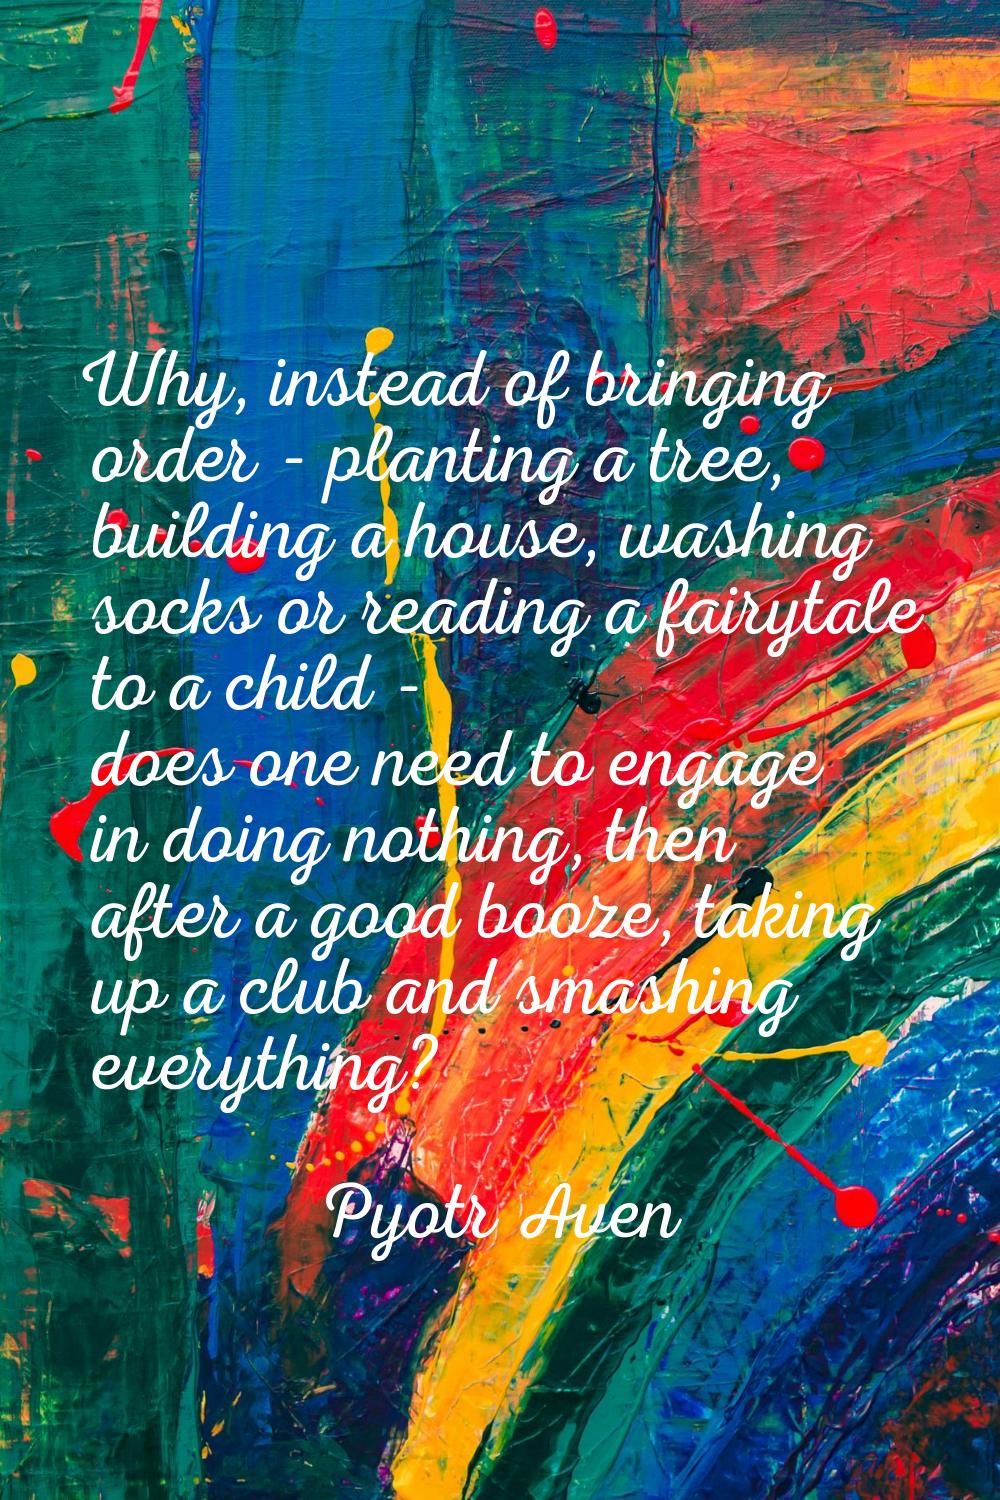 Why, instead of bringing order - planting a tree, building a house, washing socks or reading a fair